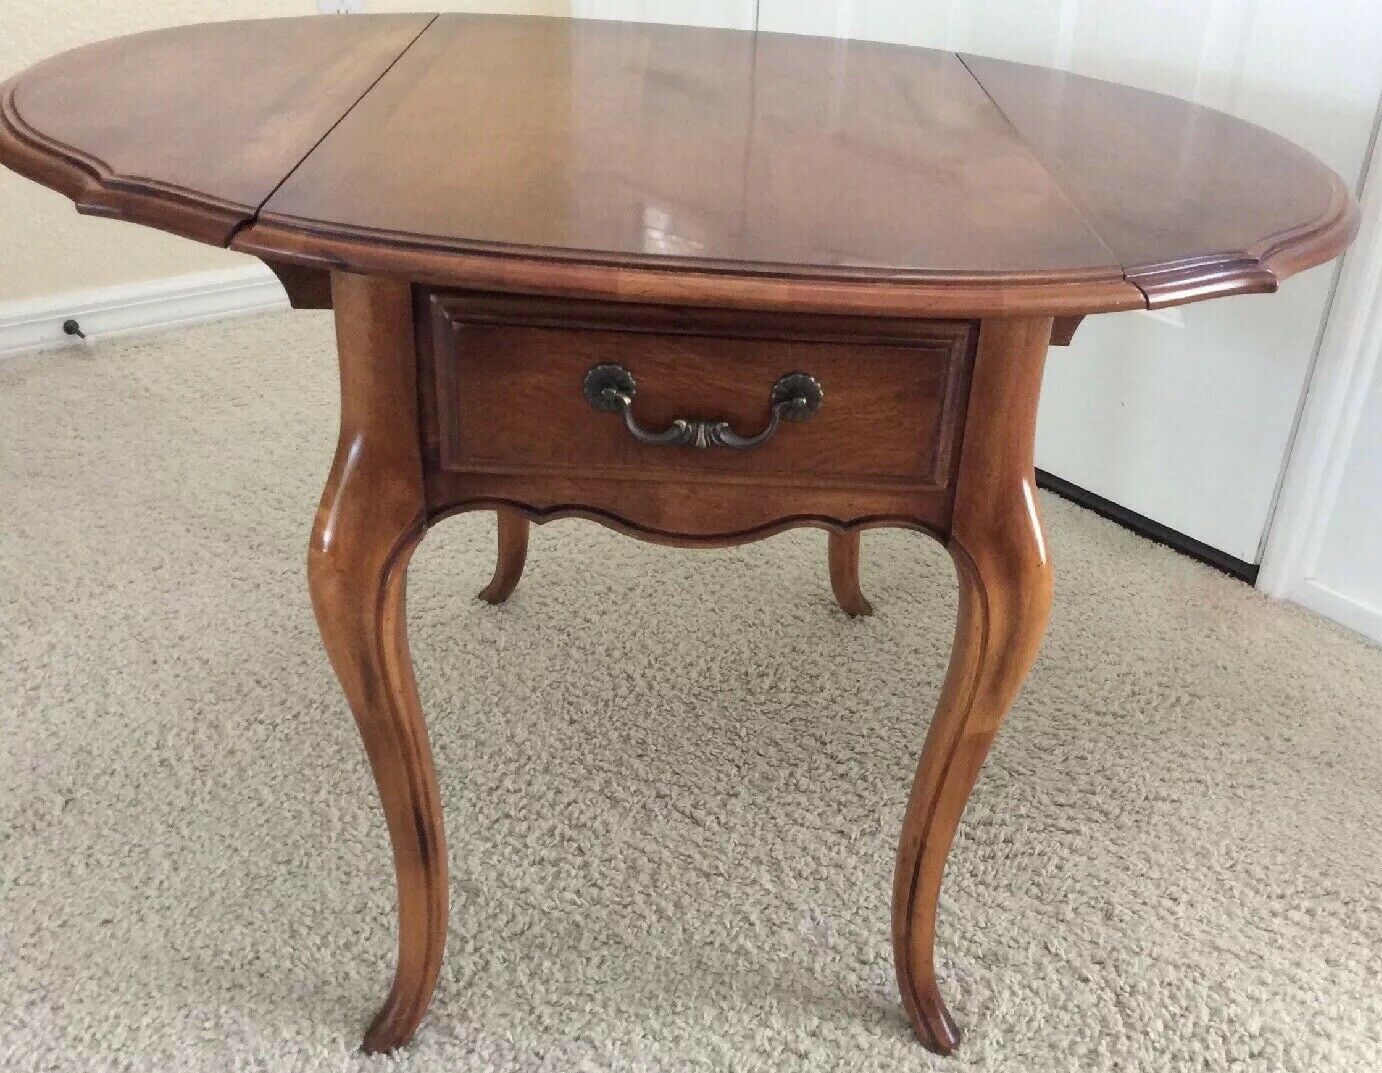 ethan allen used furniture for tips end tables craigslist country french drop leaf table leons dining room chairs glass drawing fire pit cover tall skinny sofa bedroom aberdeen